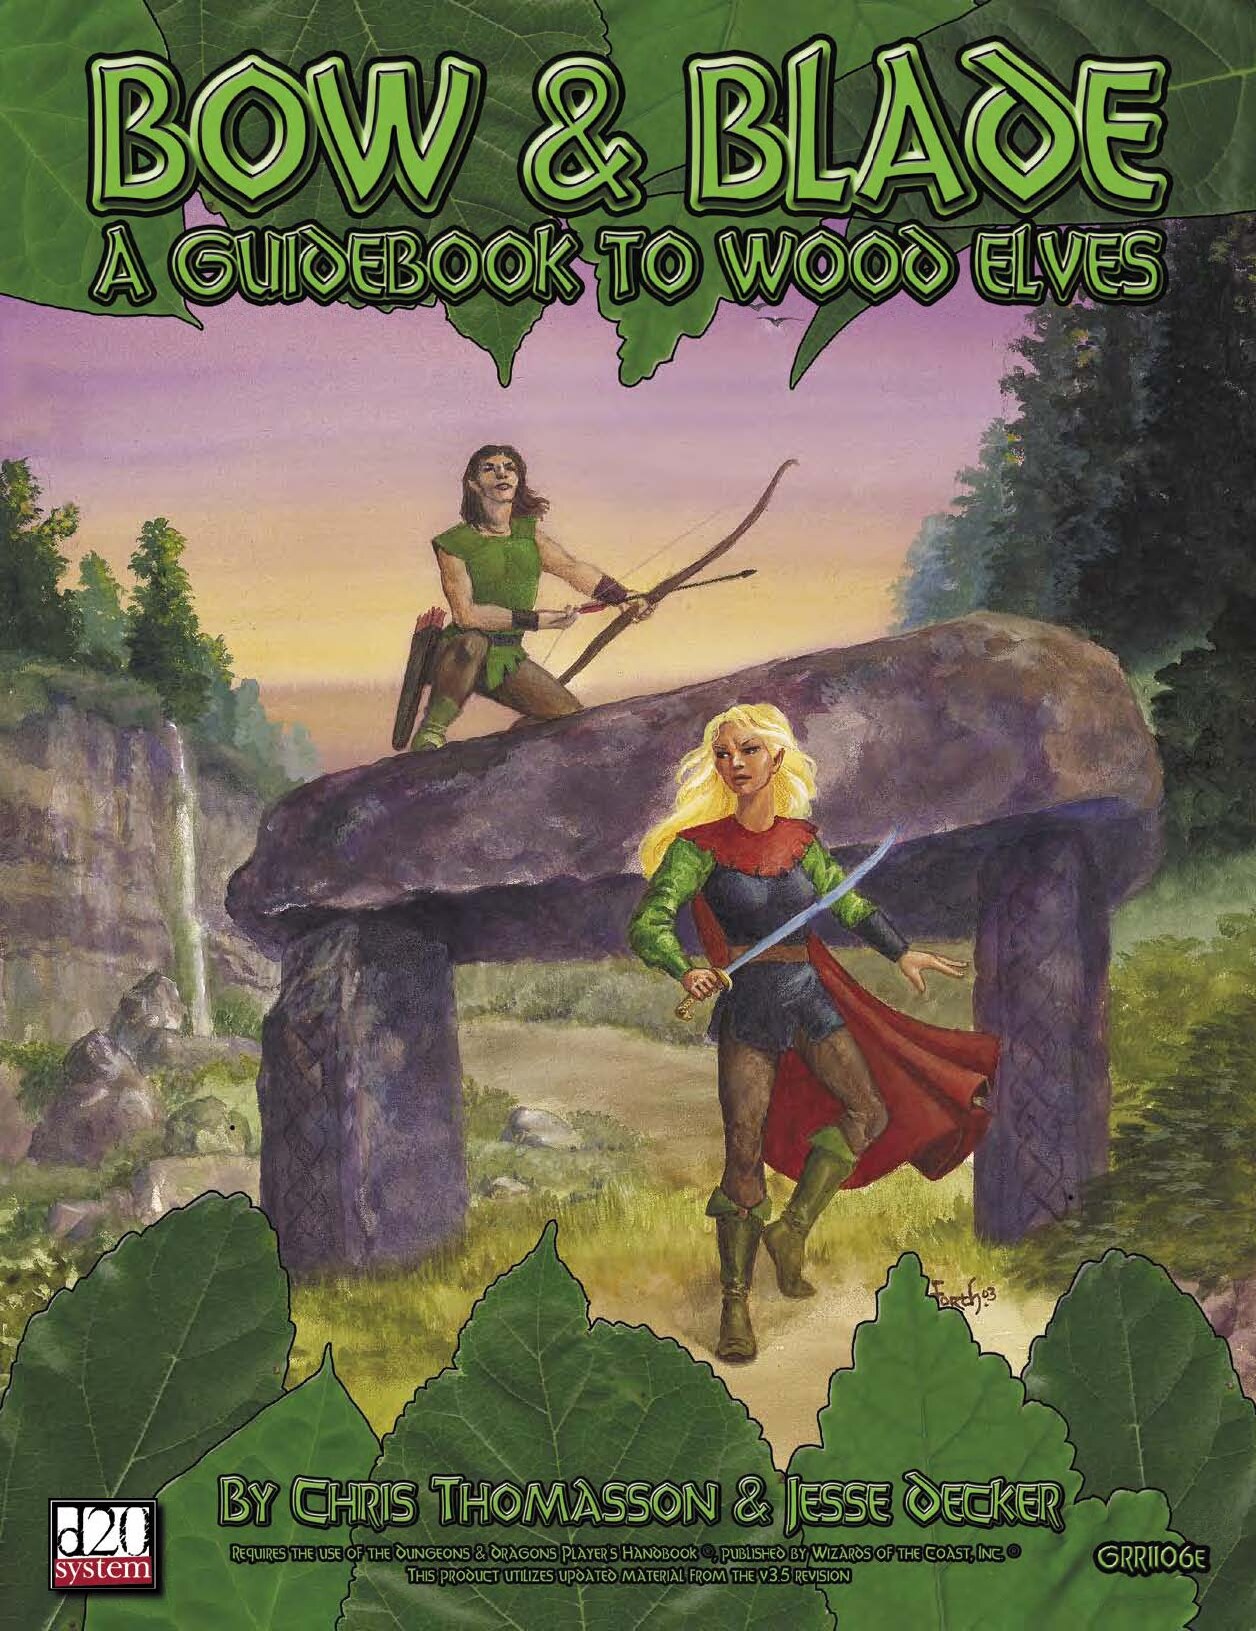 Bow & Blade - A Guidebook to Wood Elves